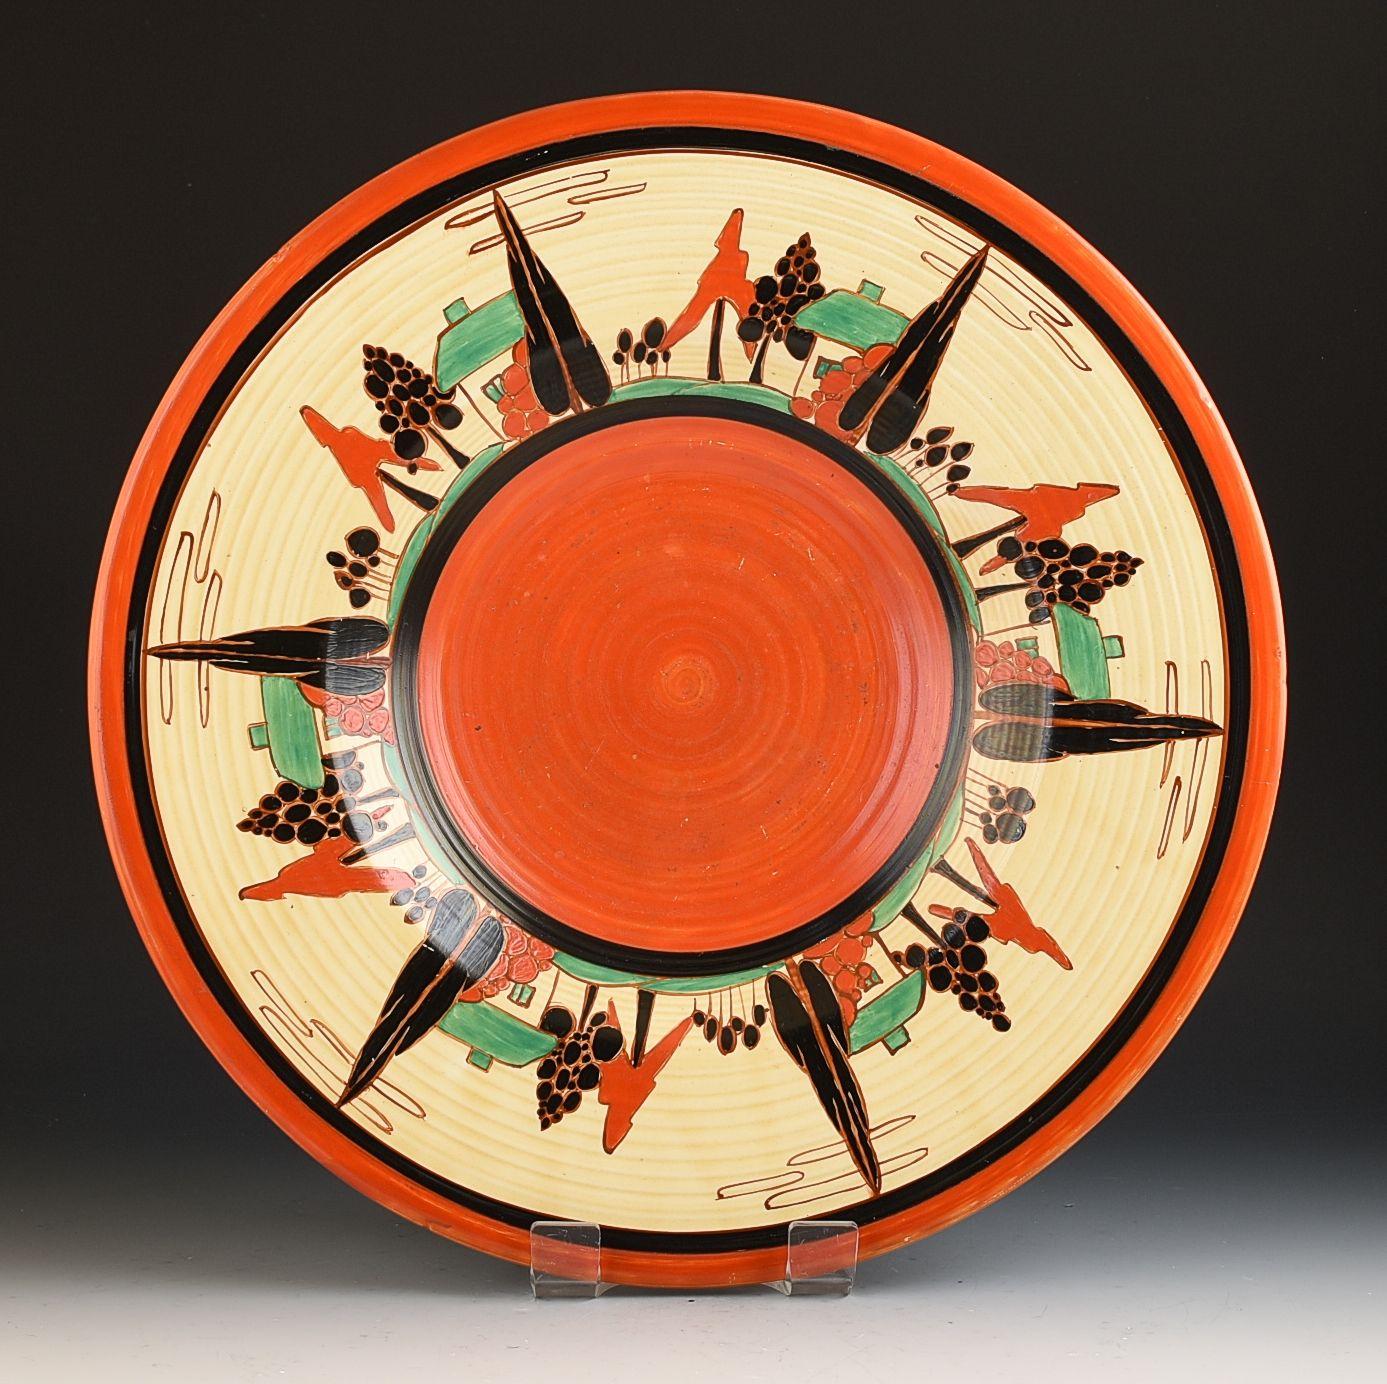 A fabulous and rare piece of Clarice Cliff dating to 1931, not seen for 30 years and the only charger known in this design. Beautifully decorated with a radial image with 6 repeating images! GUARANTEED to be free from damage or restoration this is a